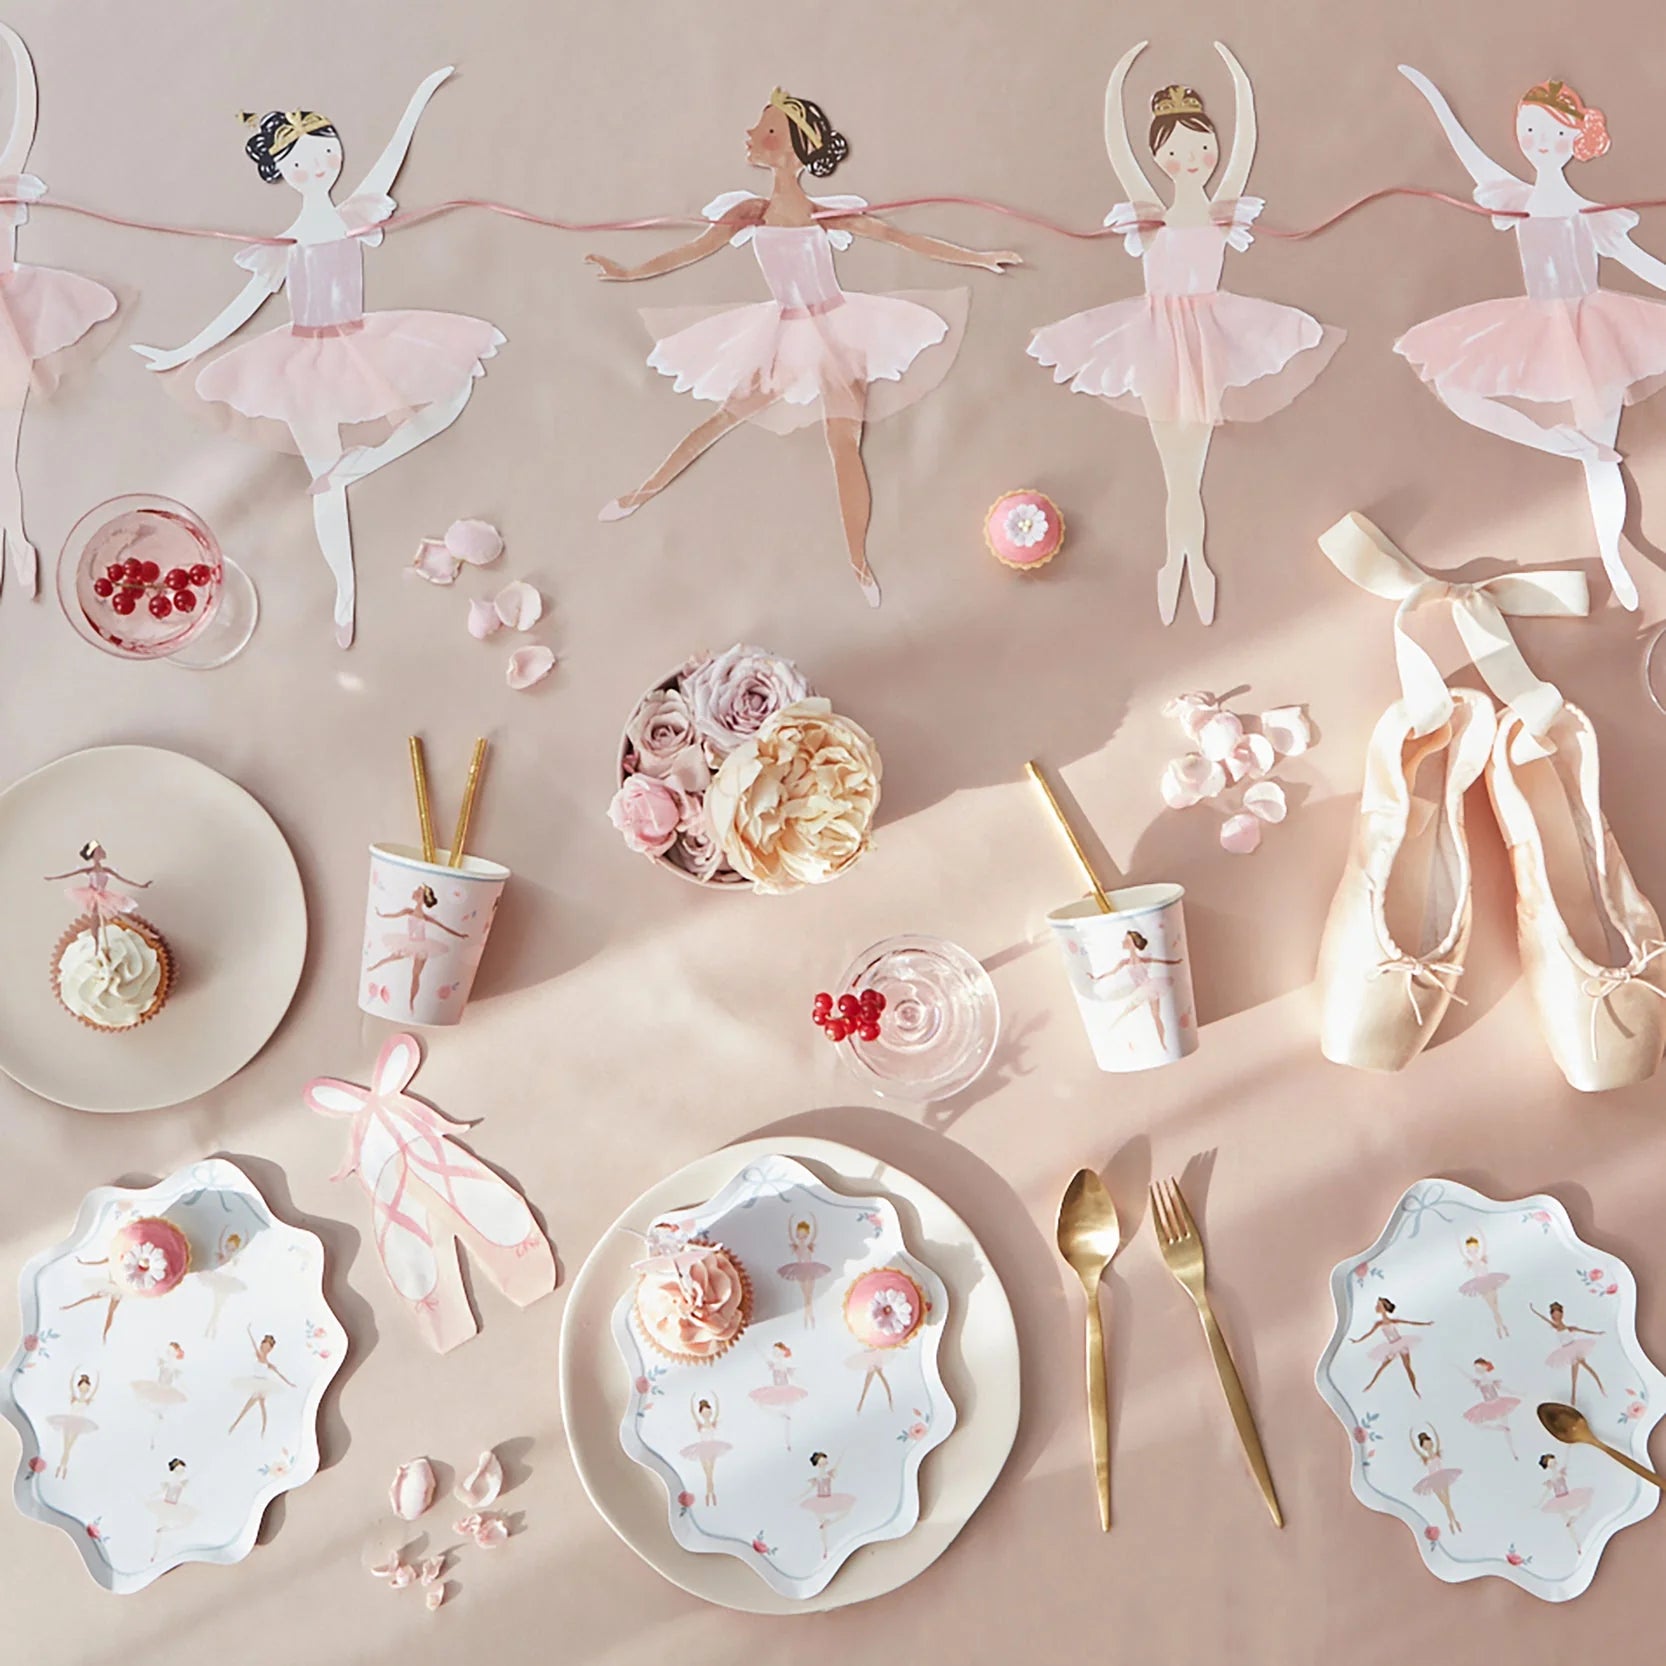 ballet themed party supplies for children's party